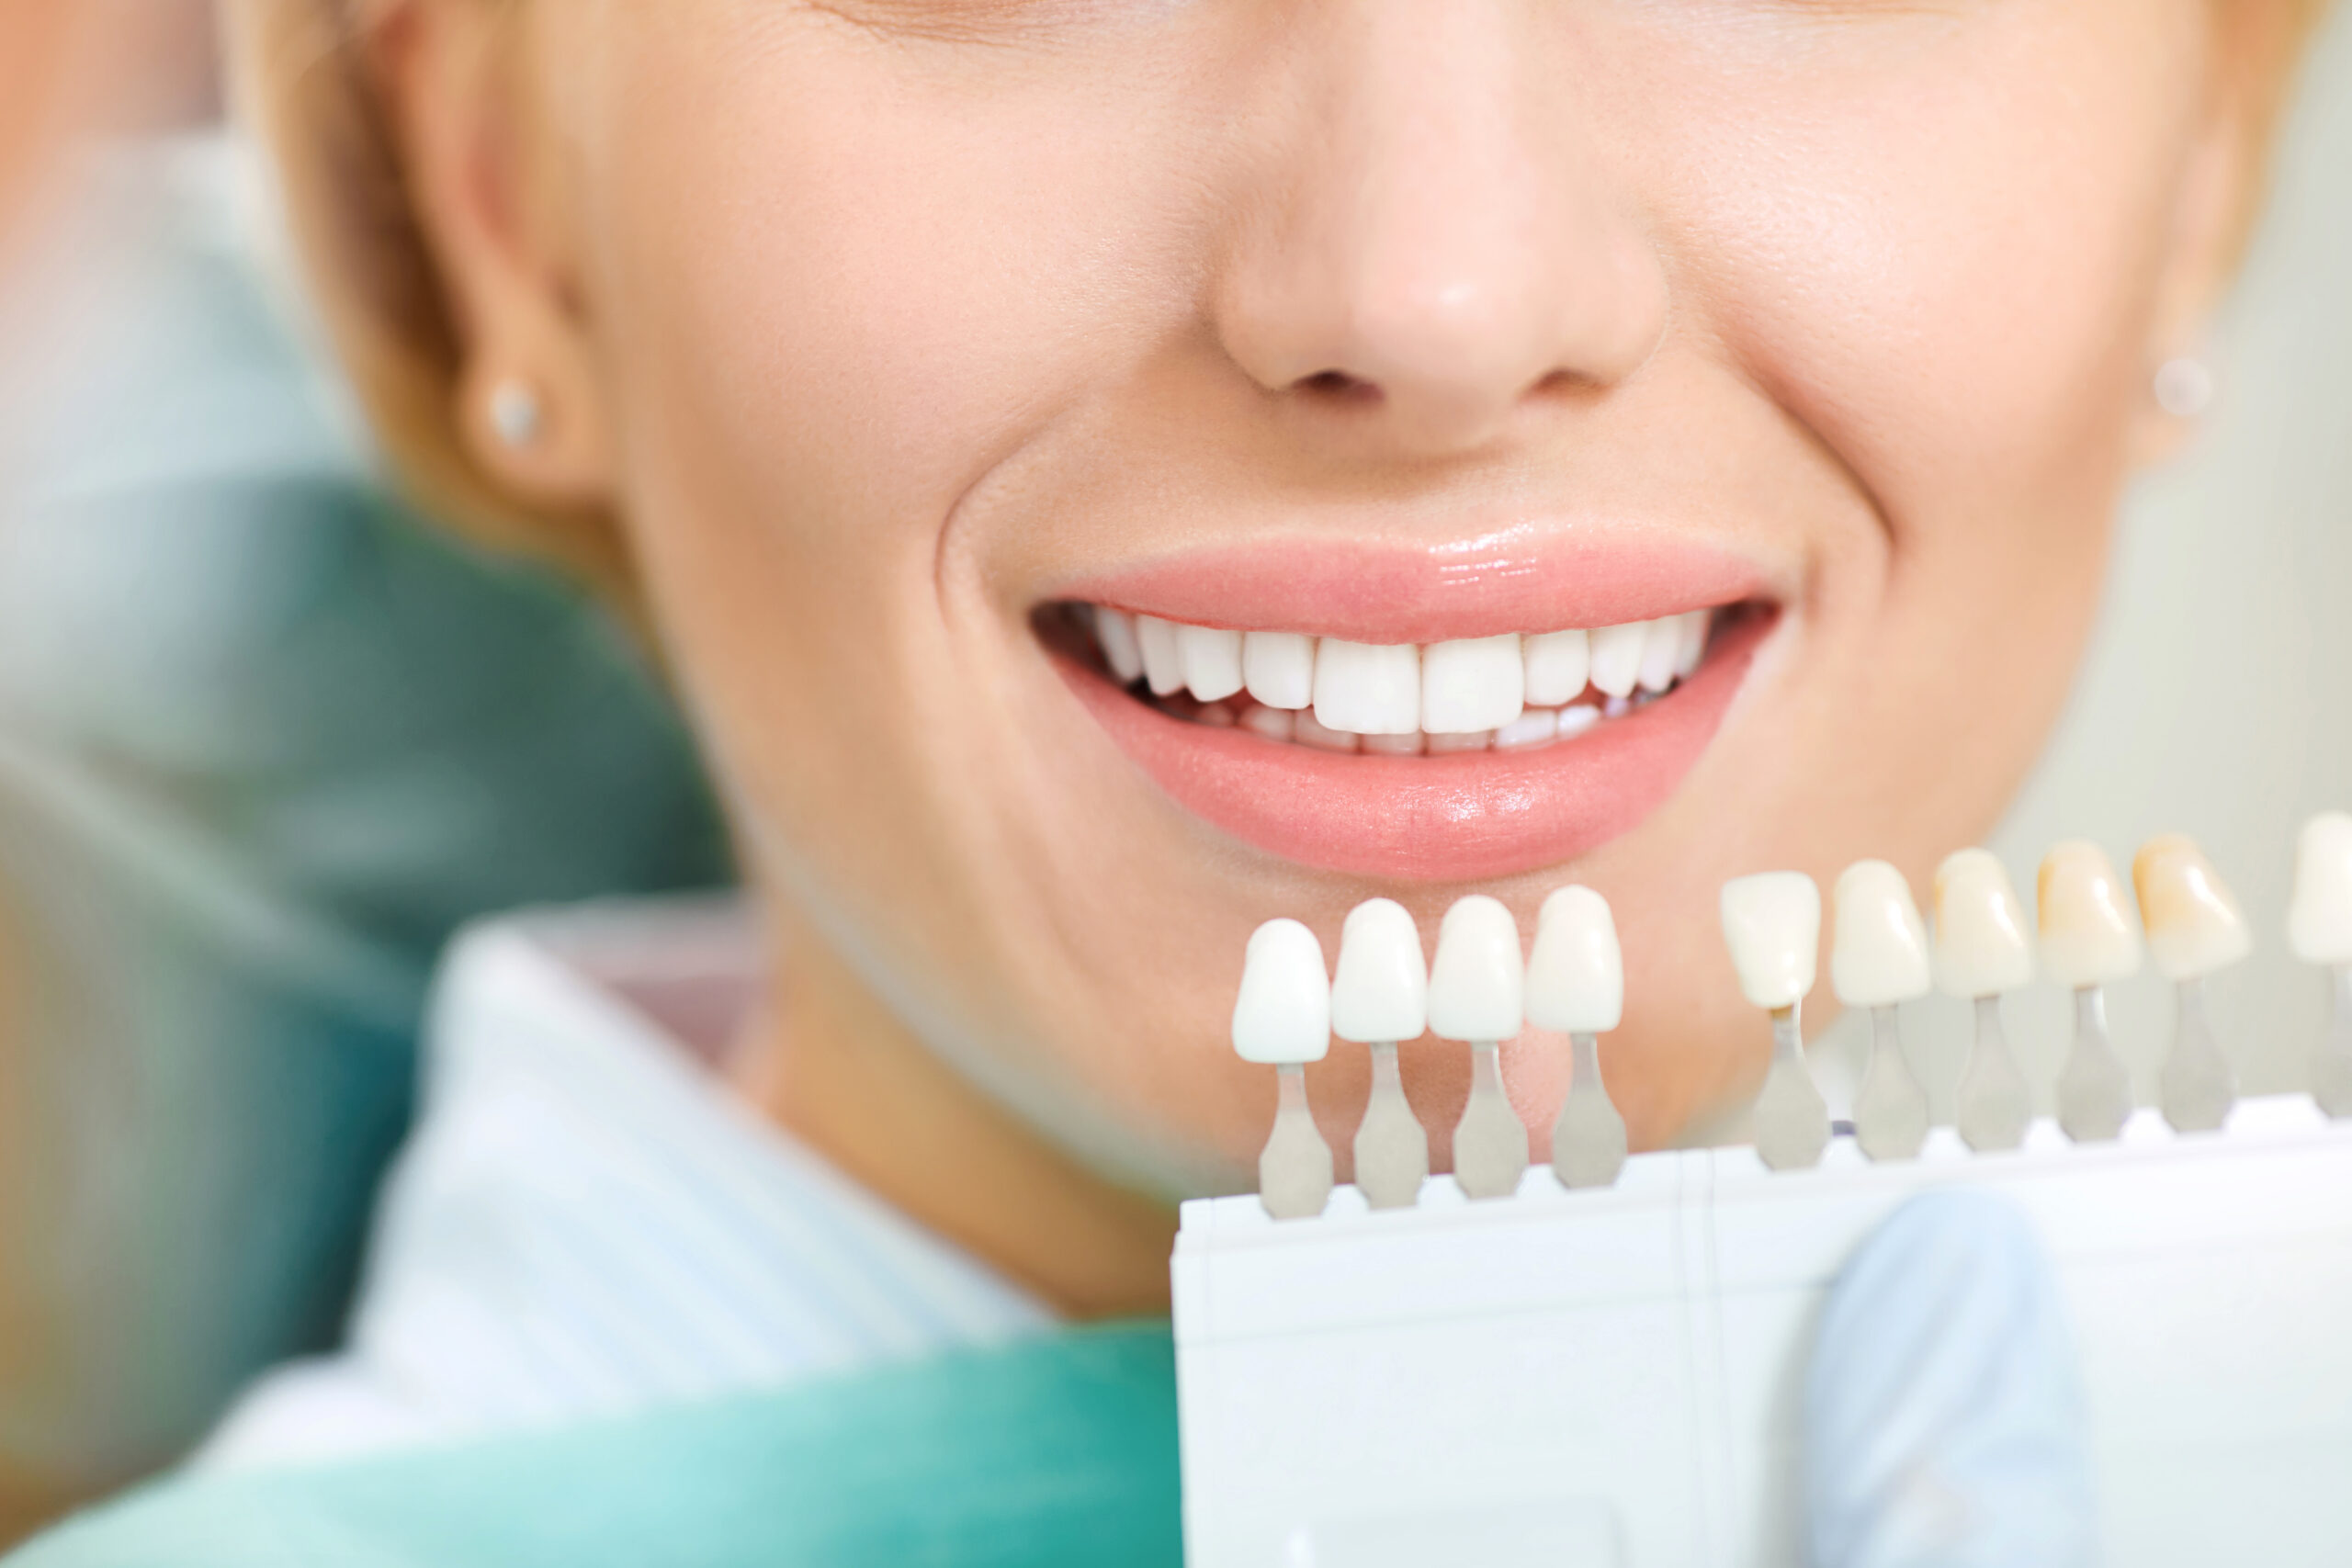 Home Teeth Whitening Kits vs. Professional Treatments in Encinitas: Pros and Cons